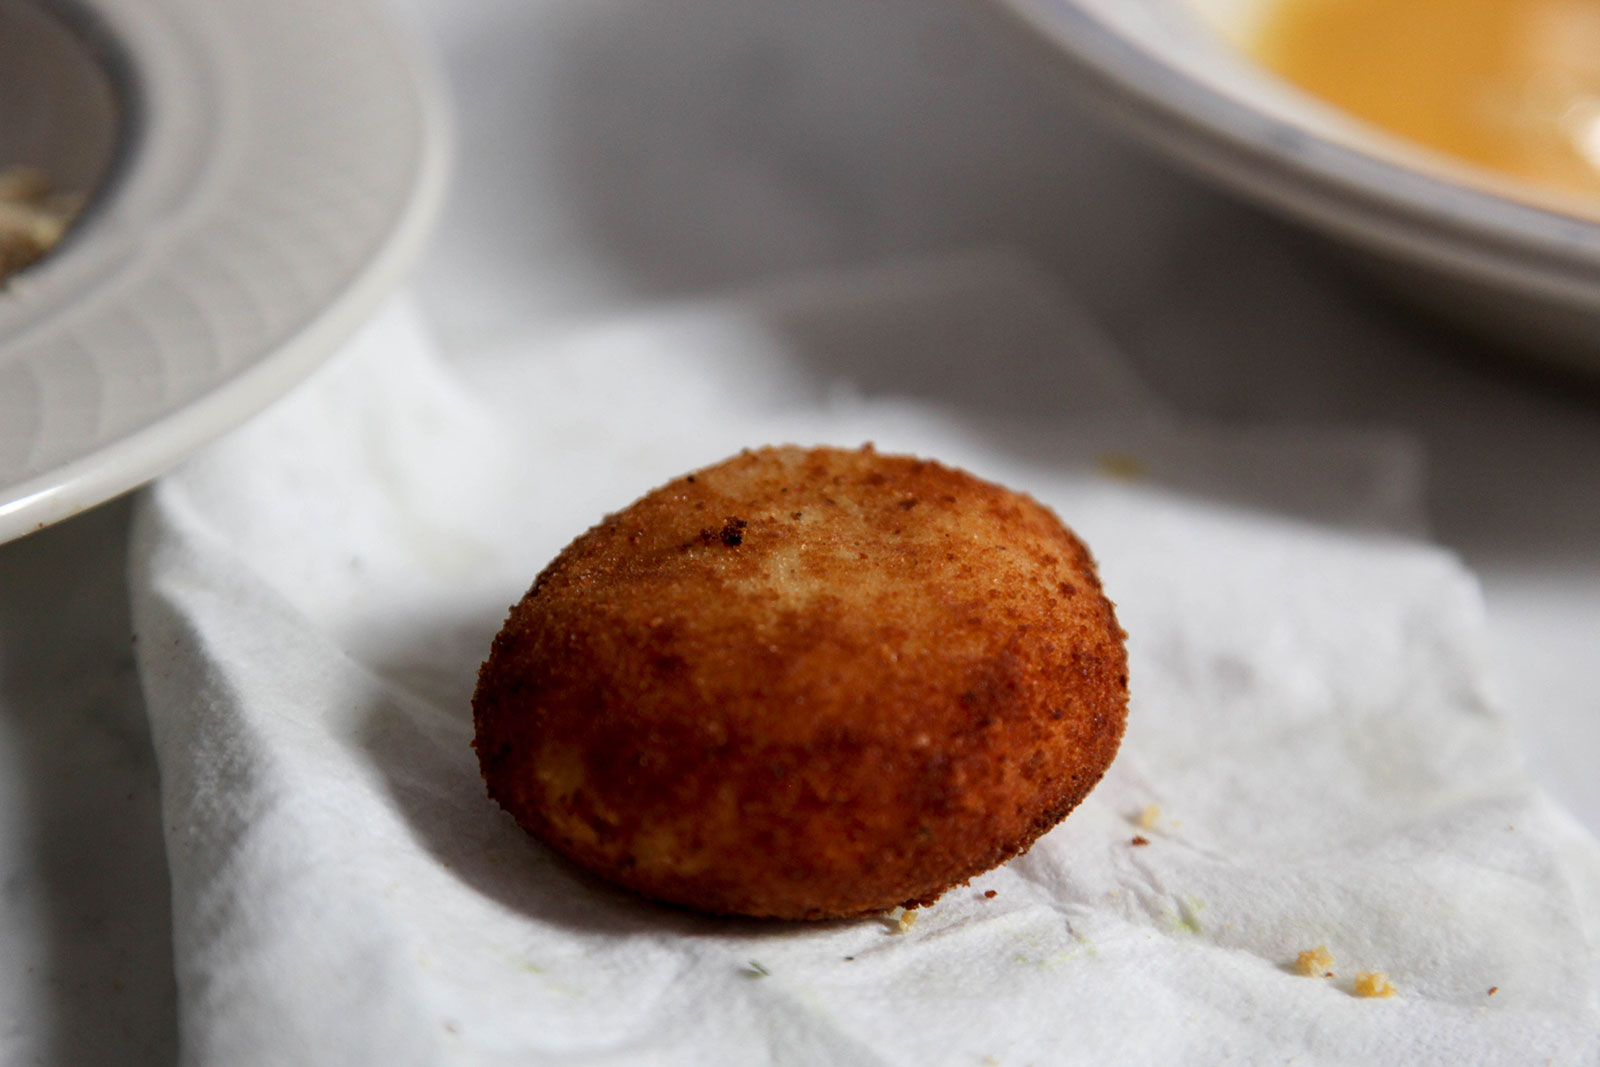 Fried croquette cooling on paper towel